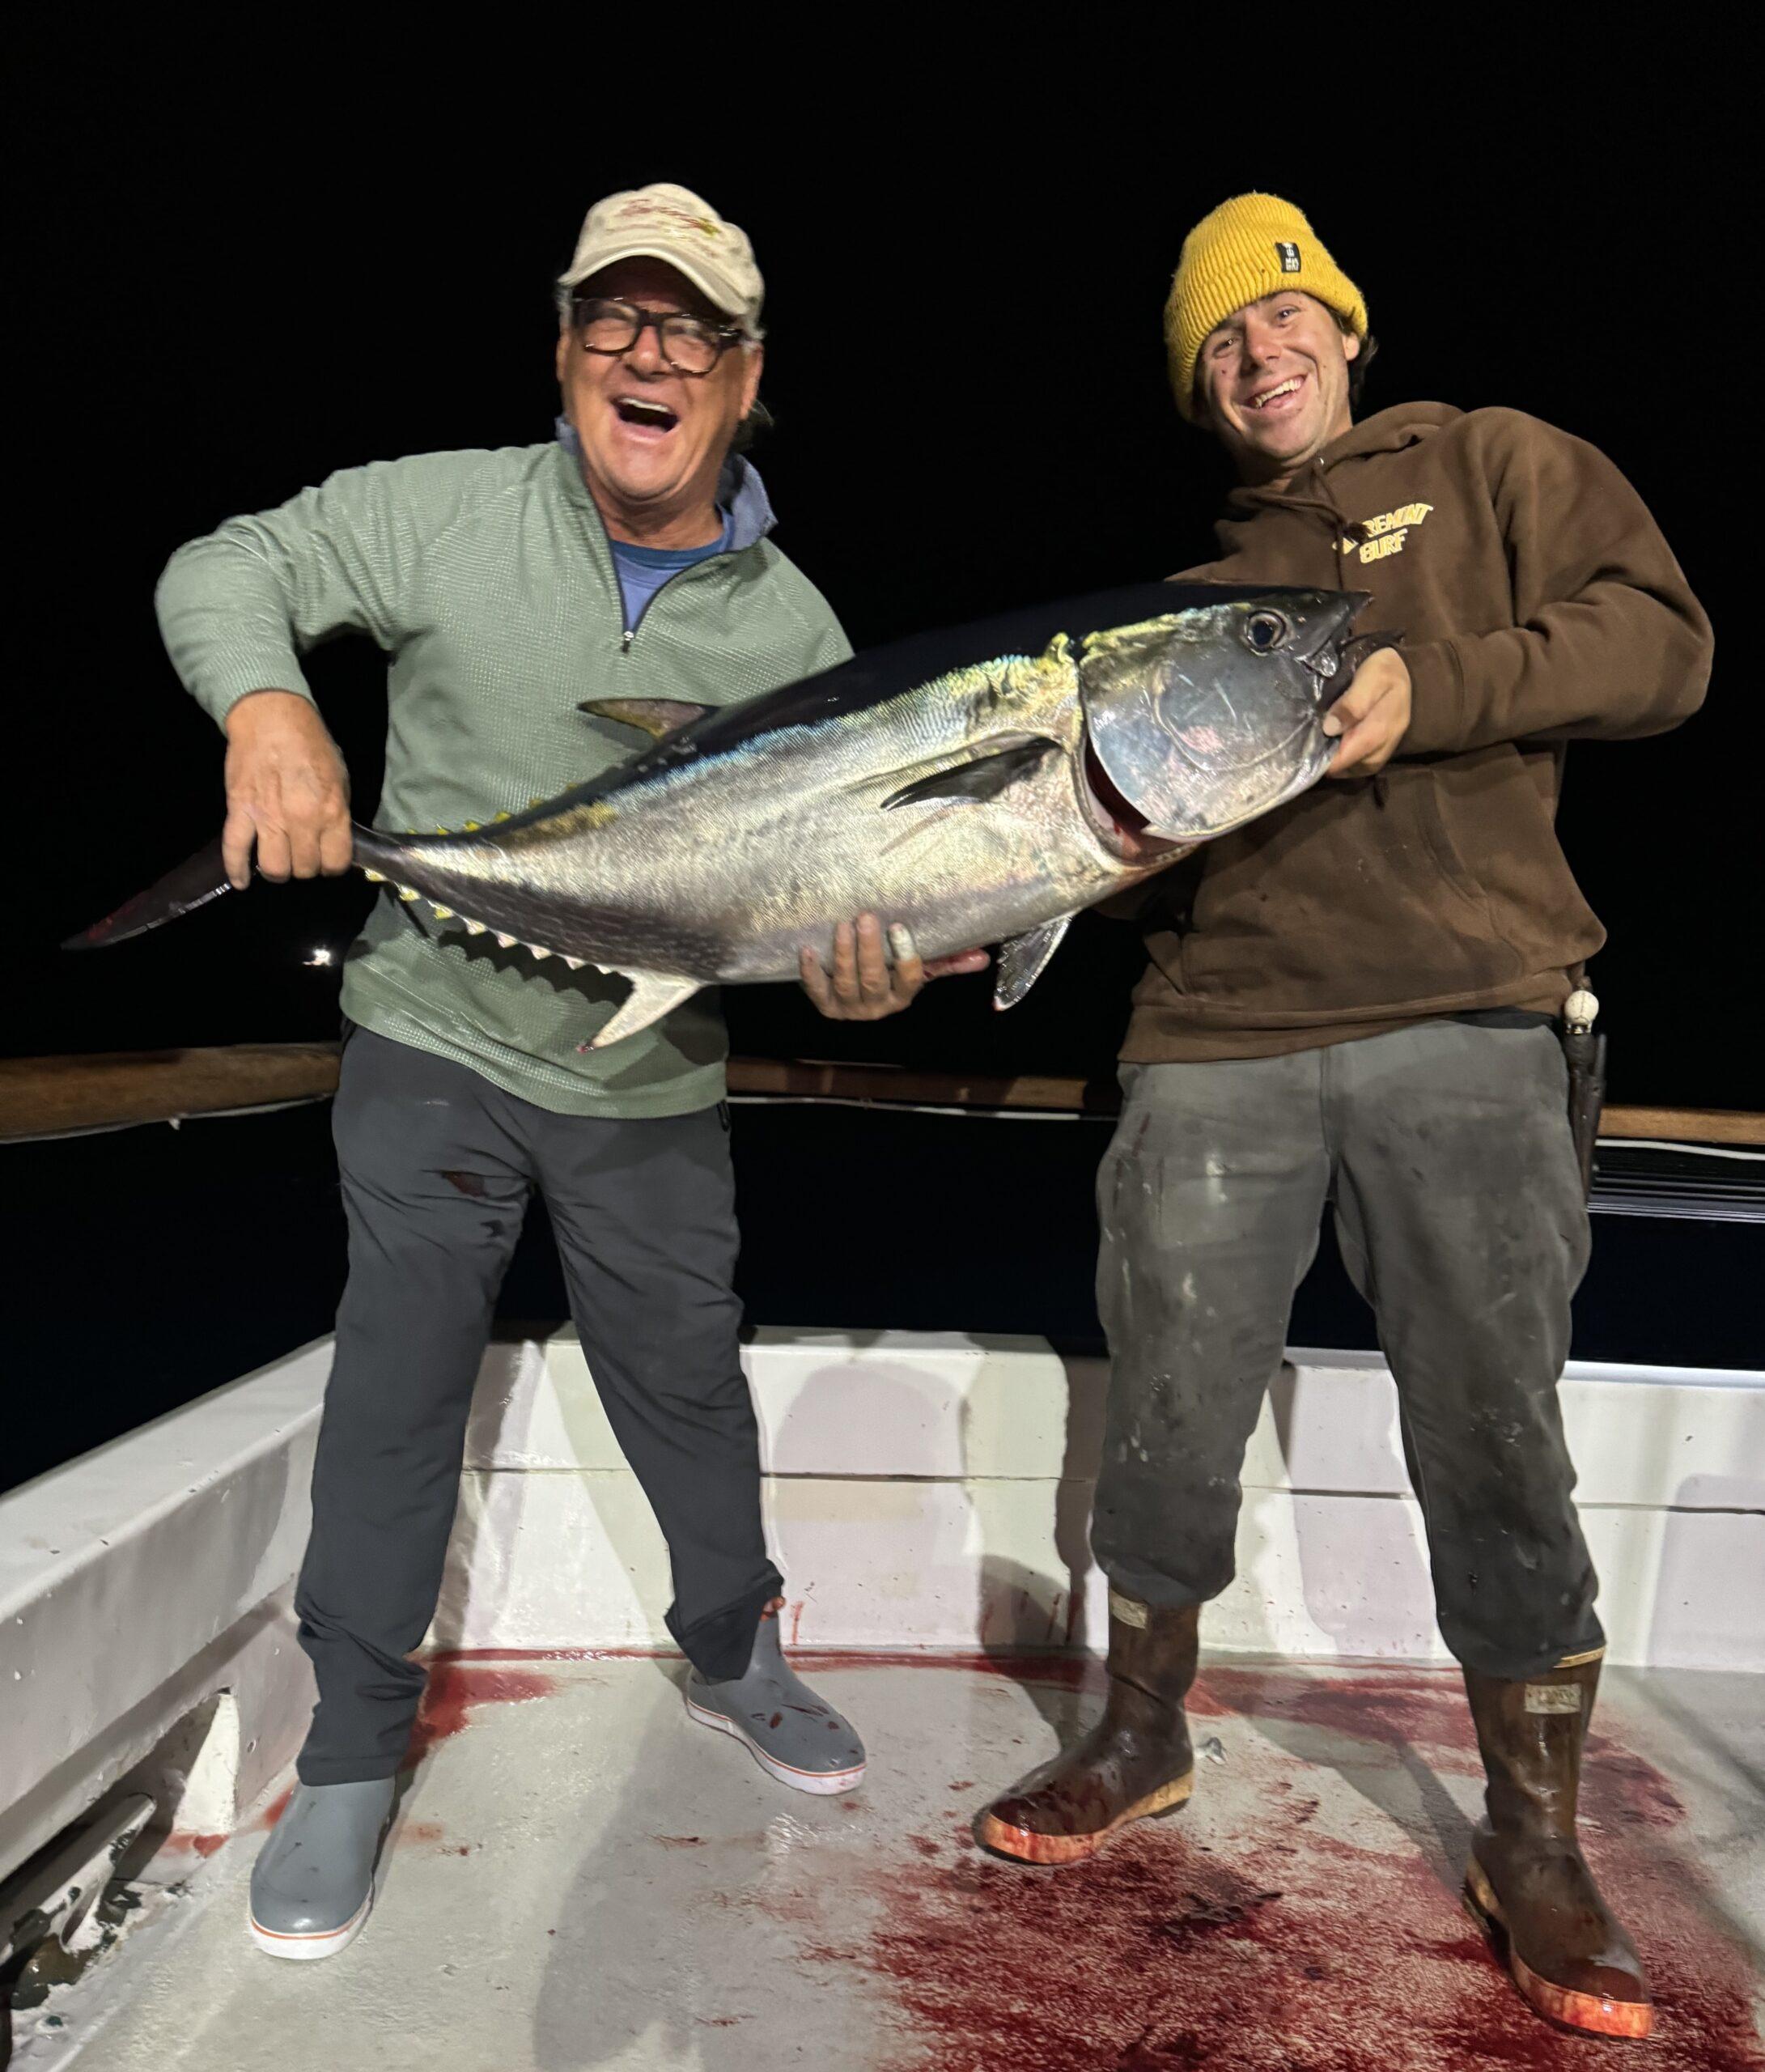 Boat crew member and angler holding a bluefin tuna.